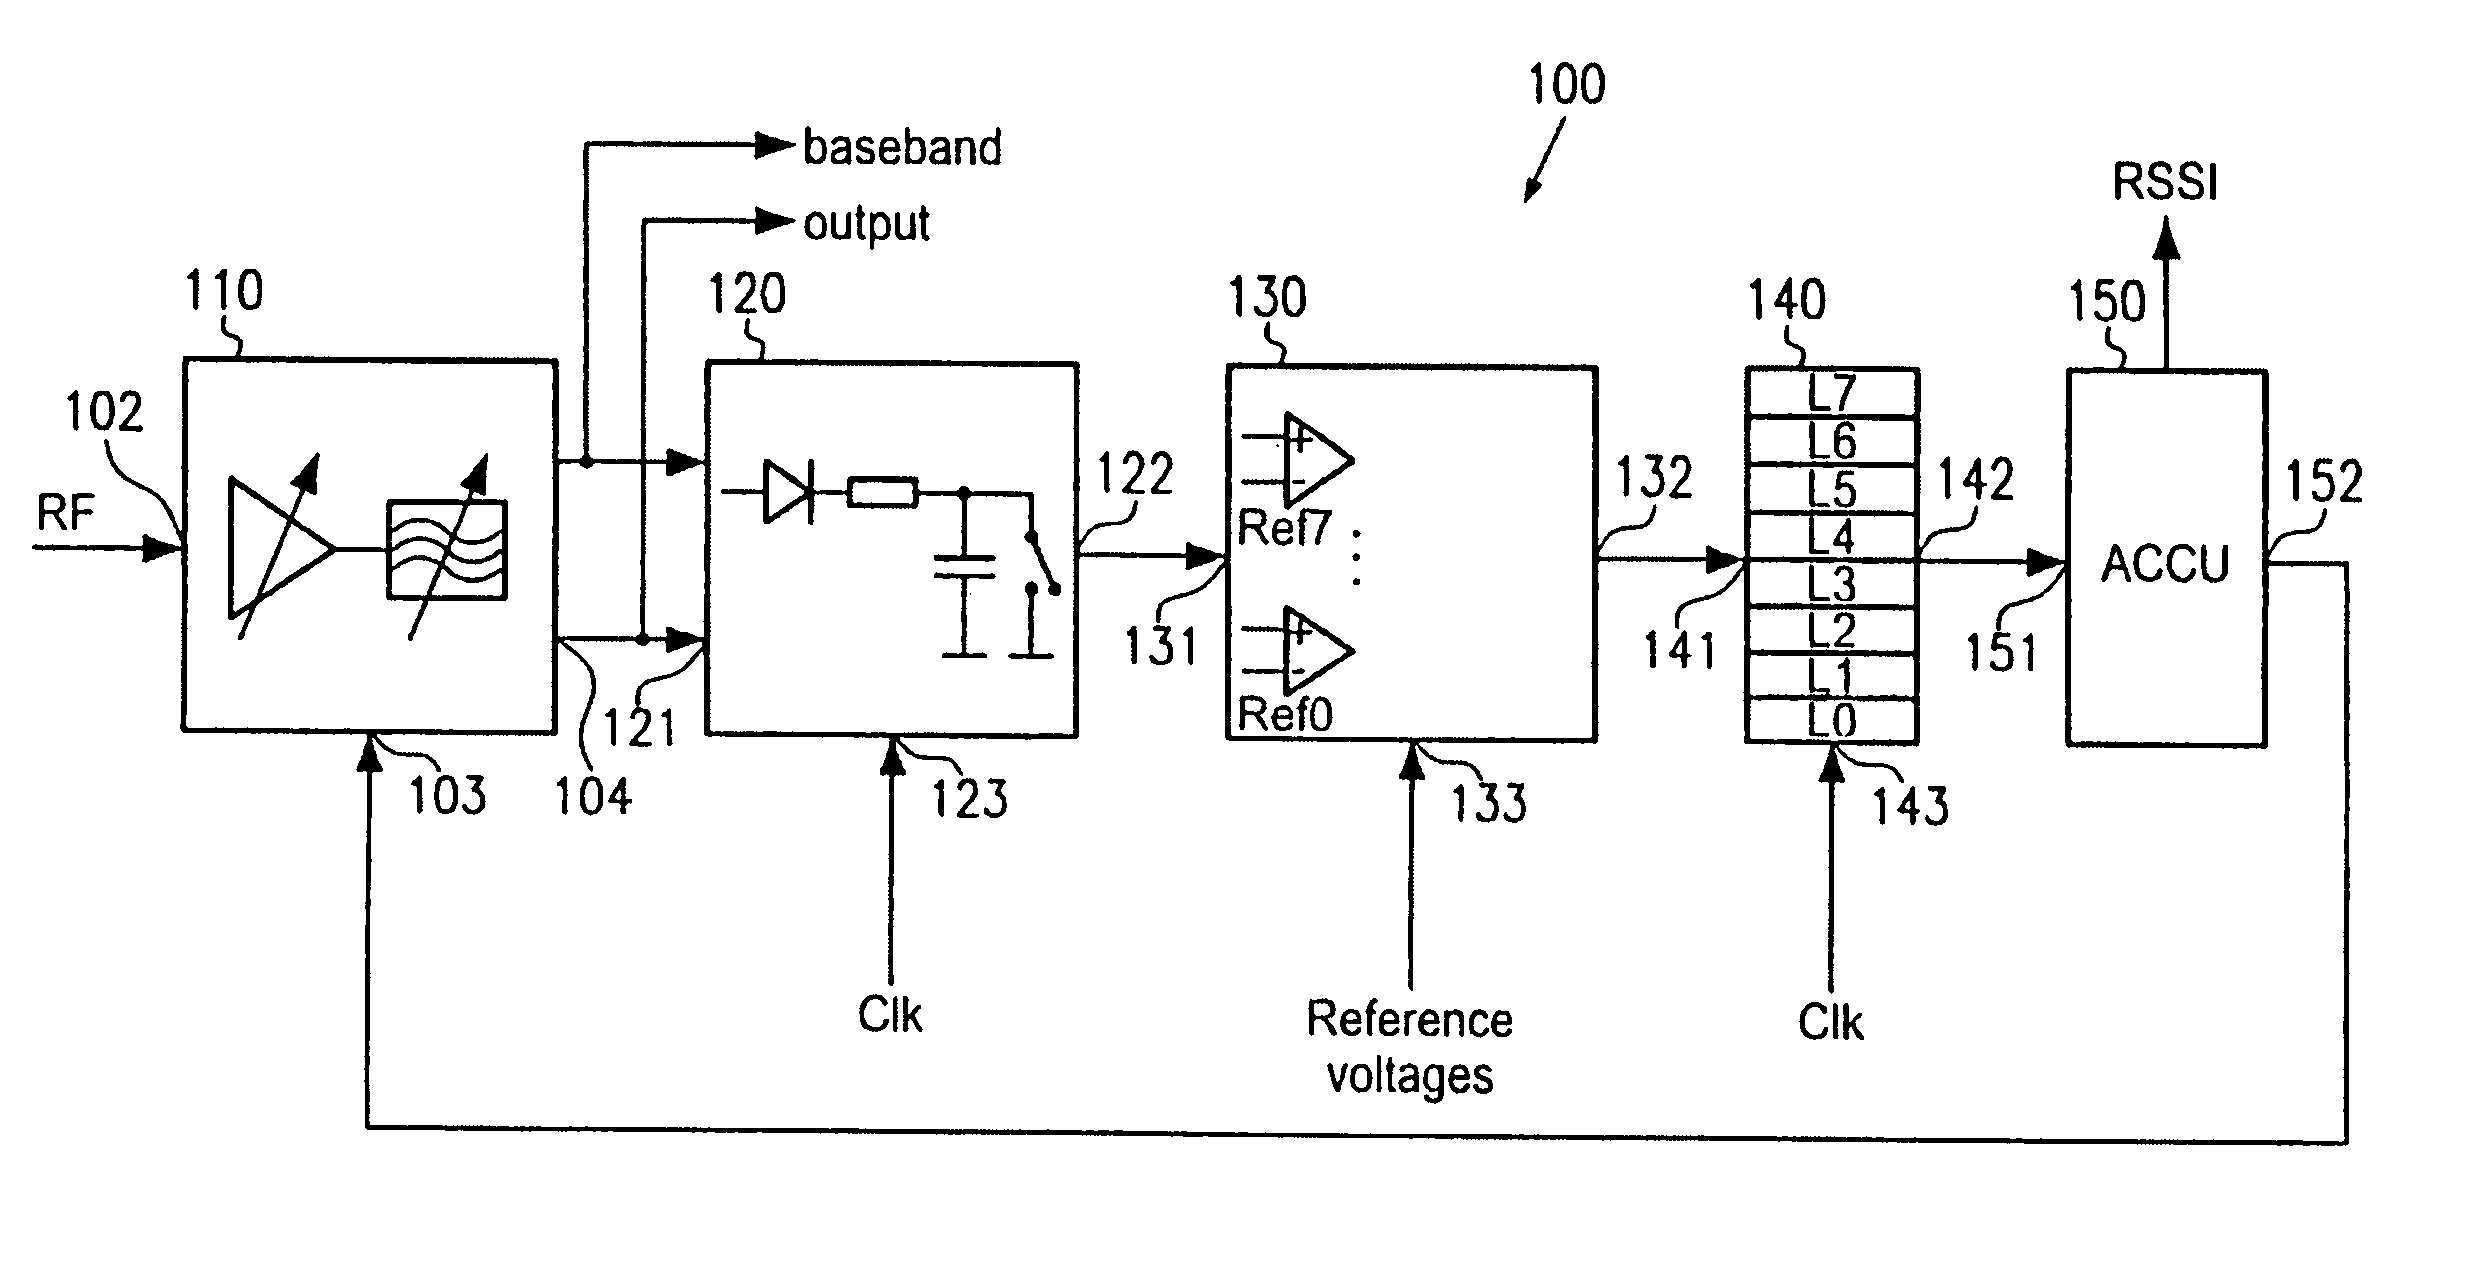 Digital automatic gain control for transceiver devices